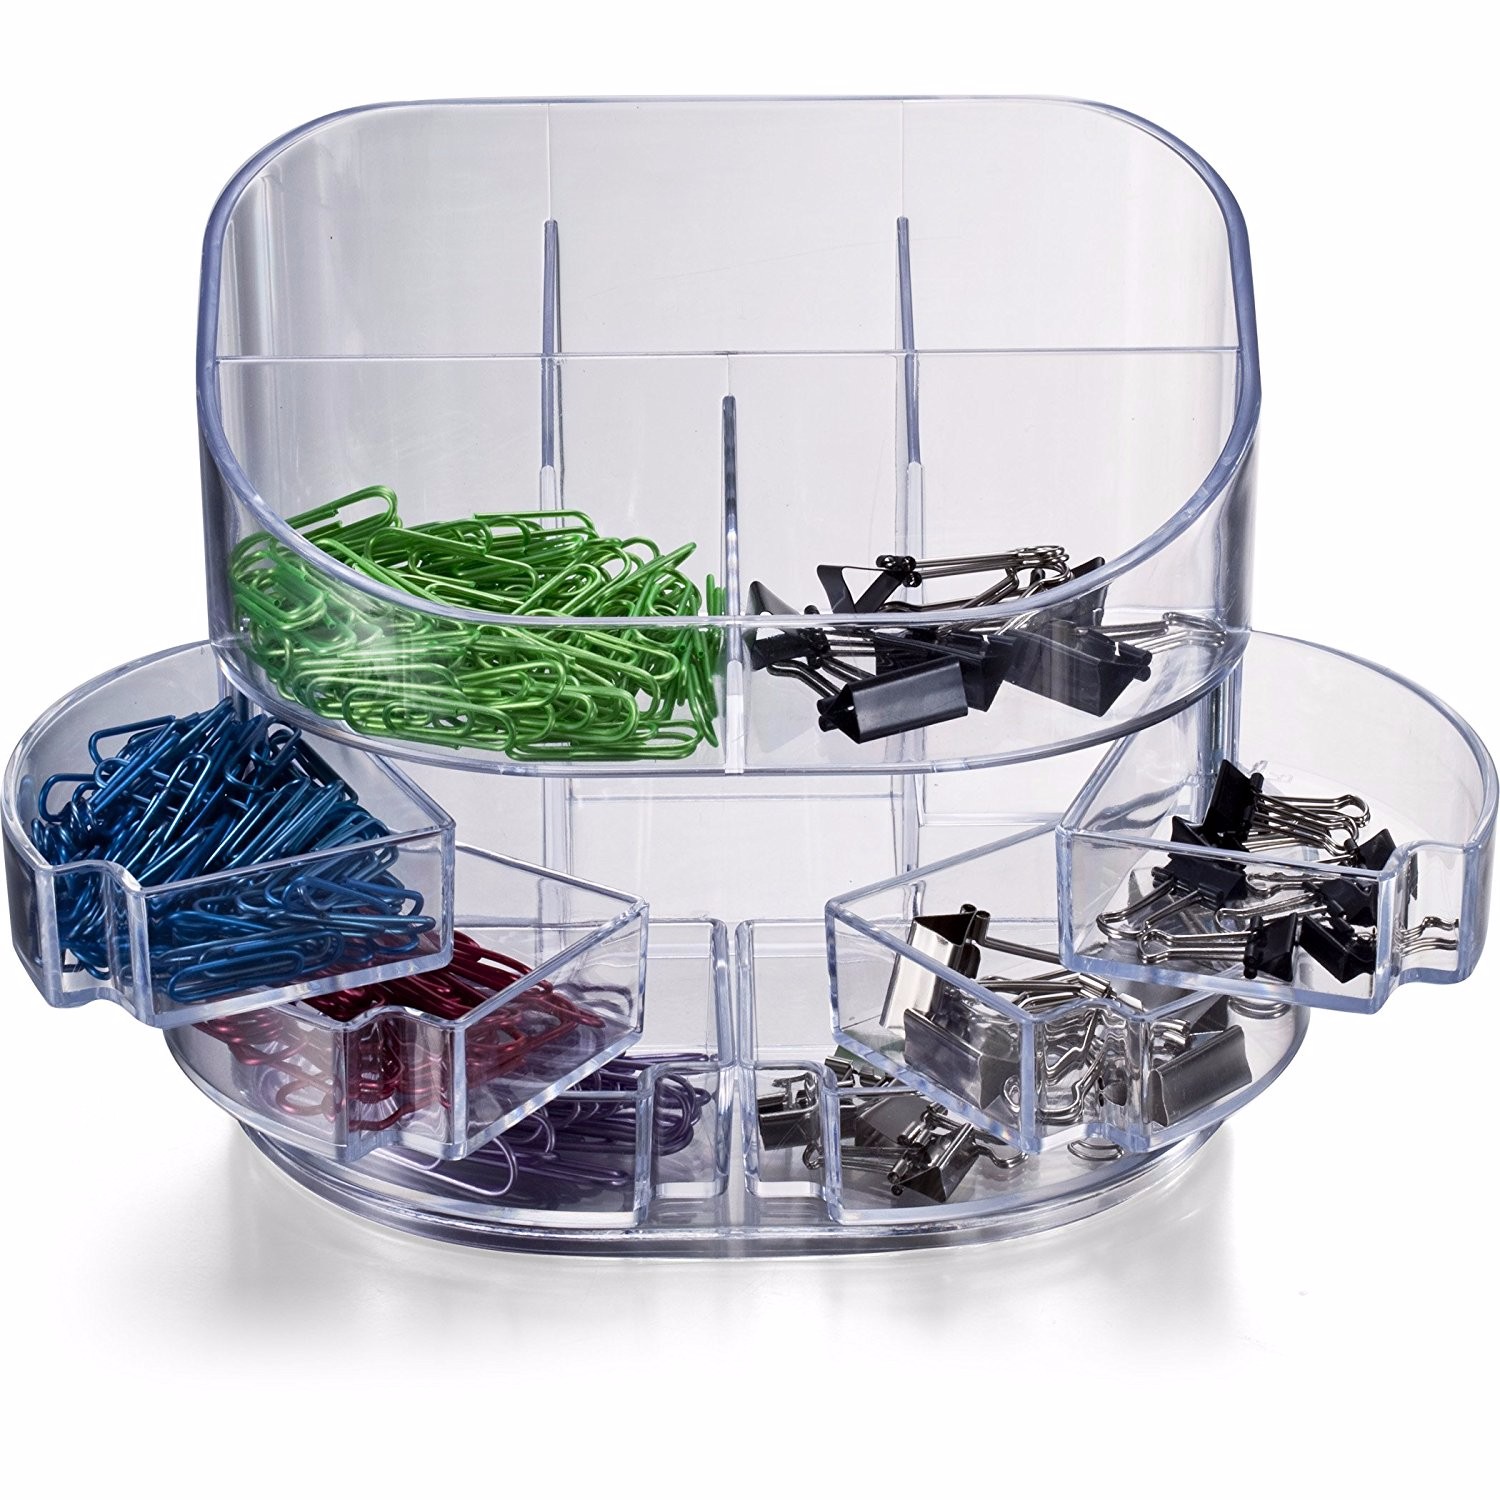 OIC Double Supply Organizer (22824)